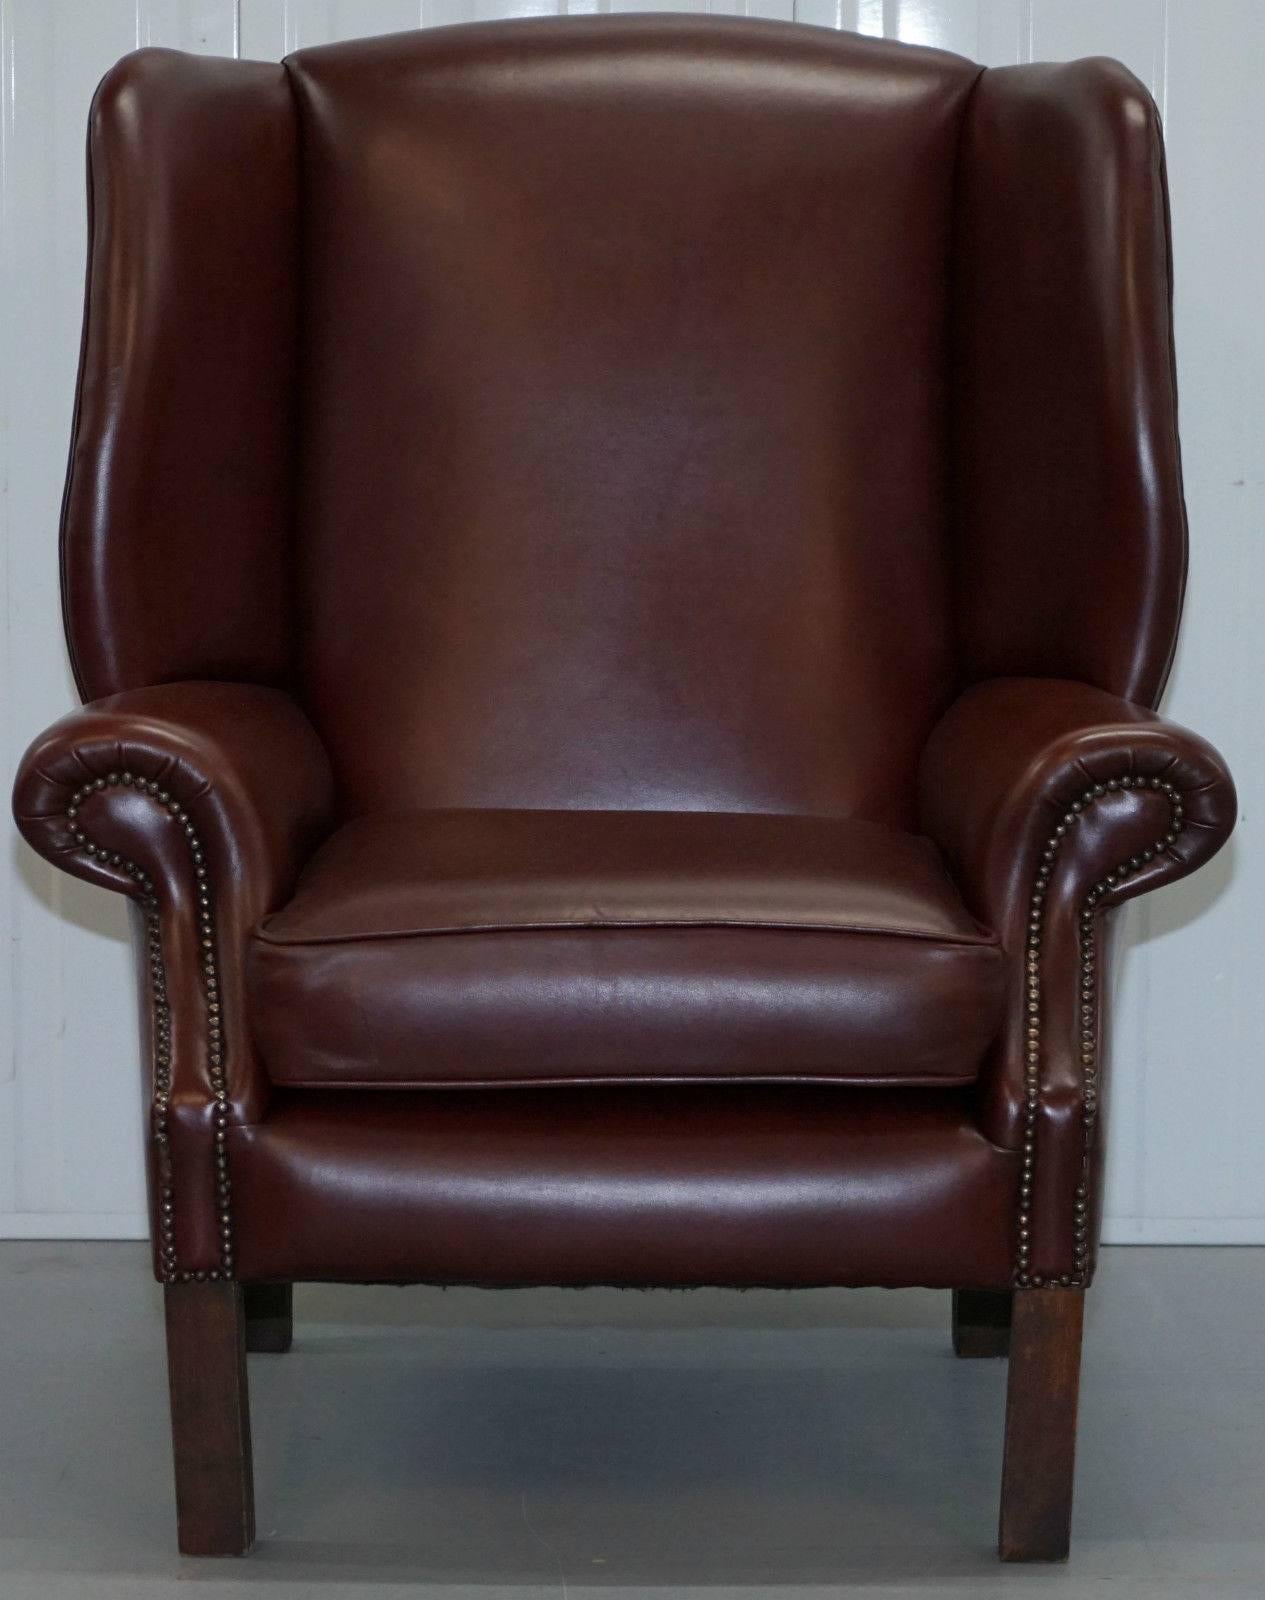 Antique and Vintage furniture Wimbledon 07850 890032

We are delighted to offer for auction this lovely straight high wingback oxblood / brown leather armchair

This piece is made in the manner of George III with the straight single legs

It's